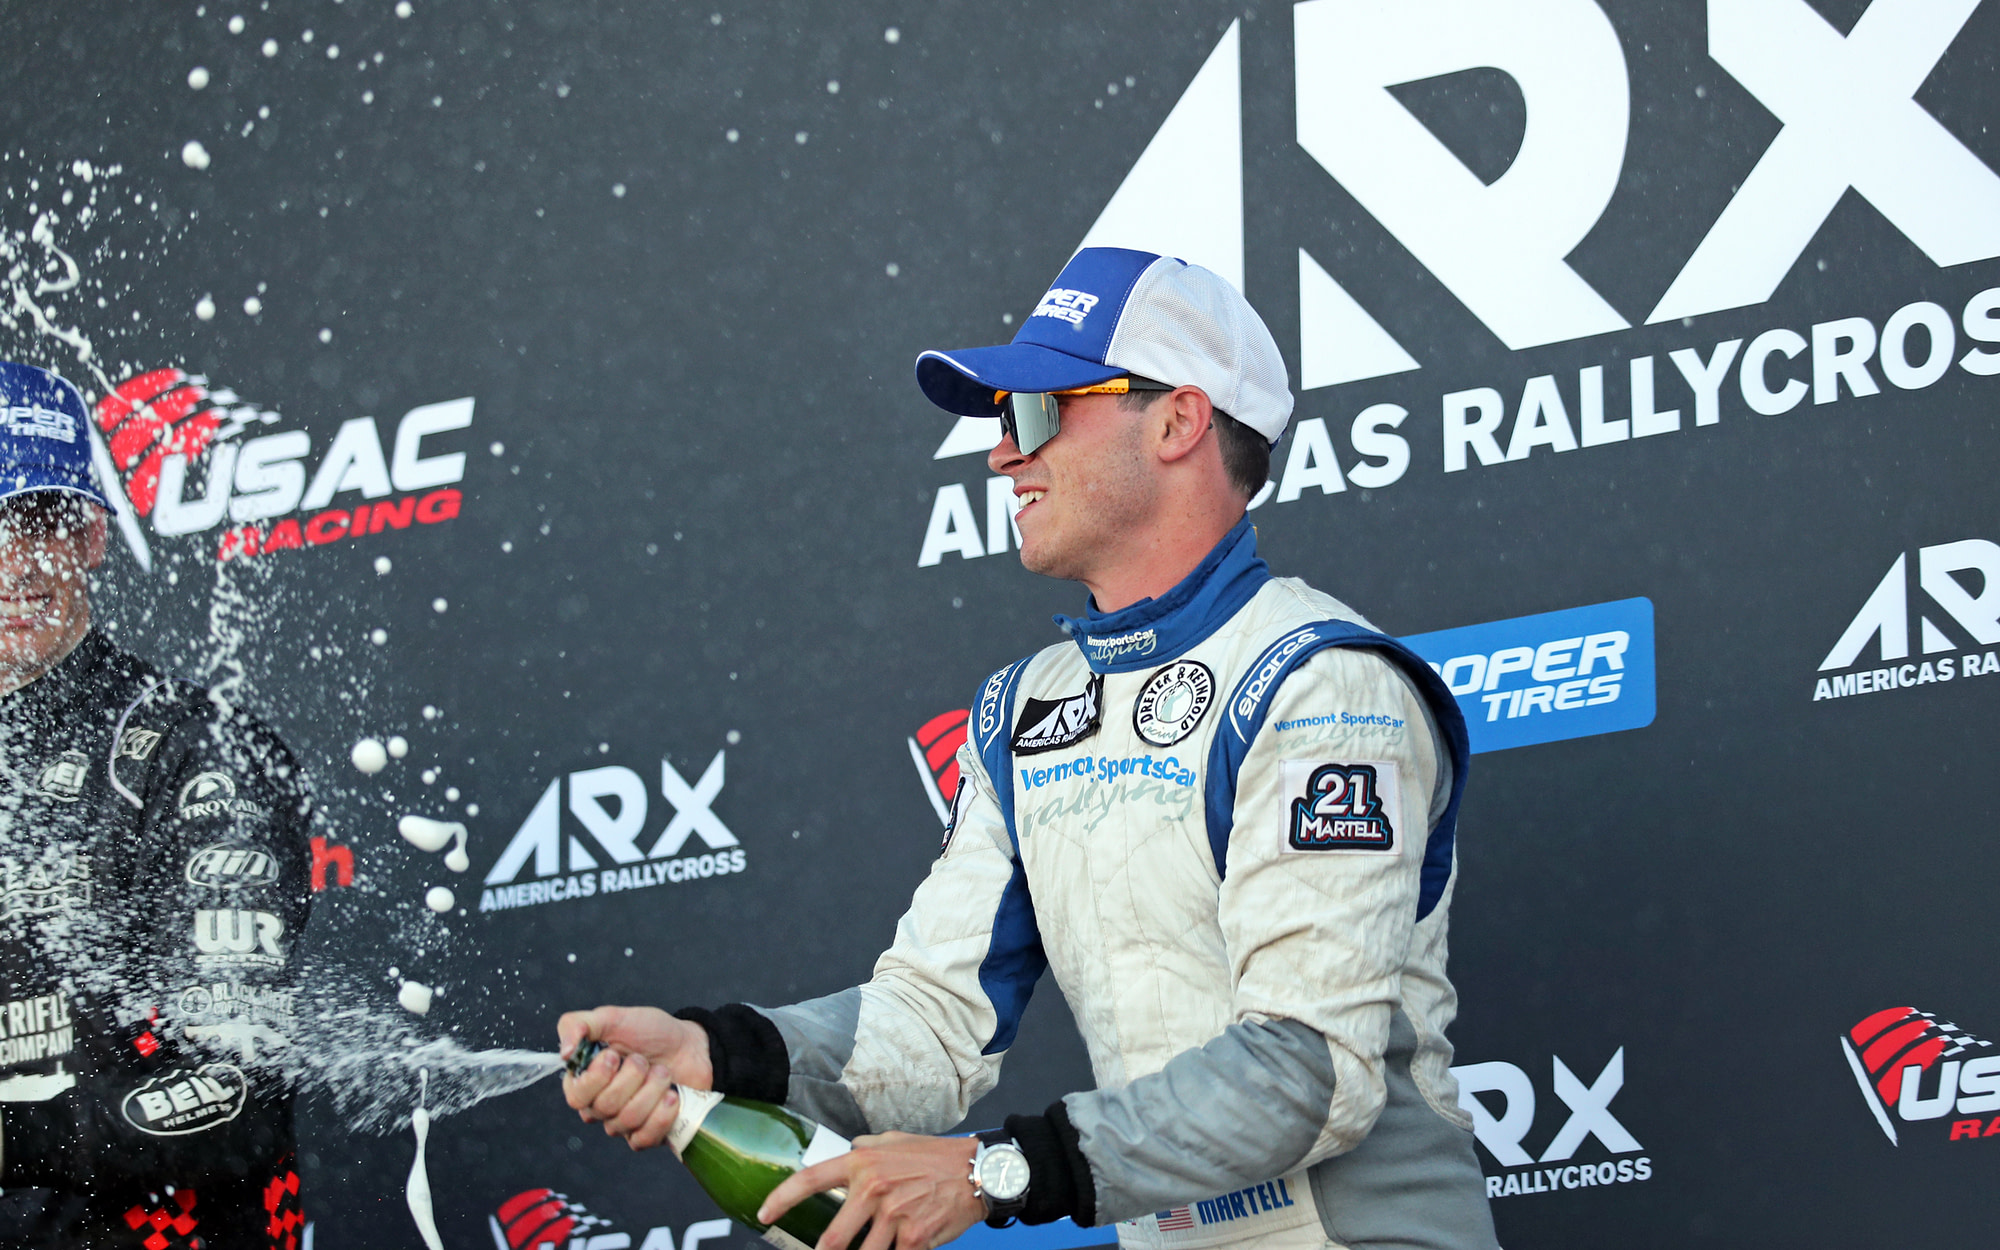 Conner Martell Wins at ARX